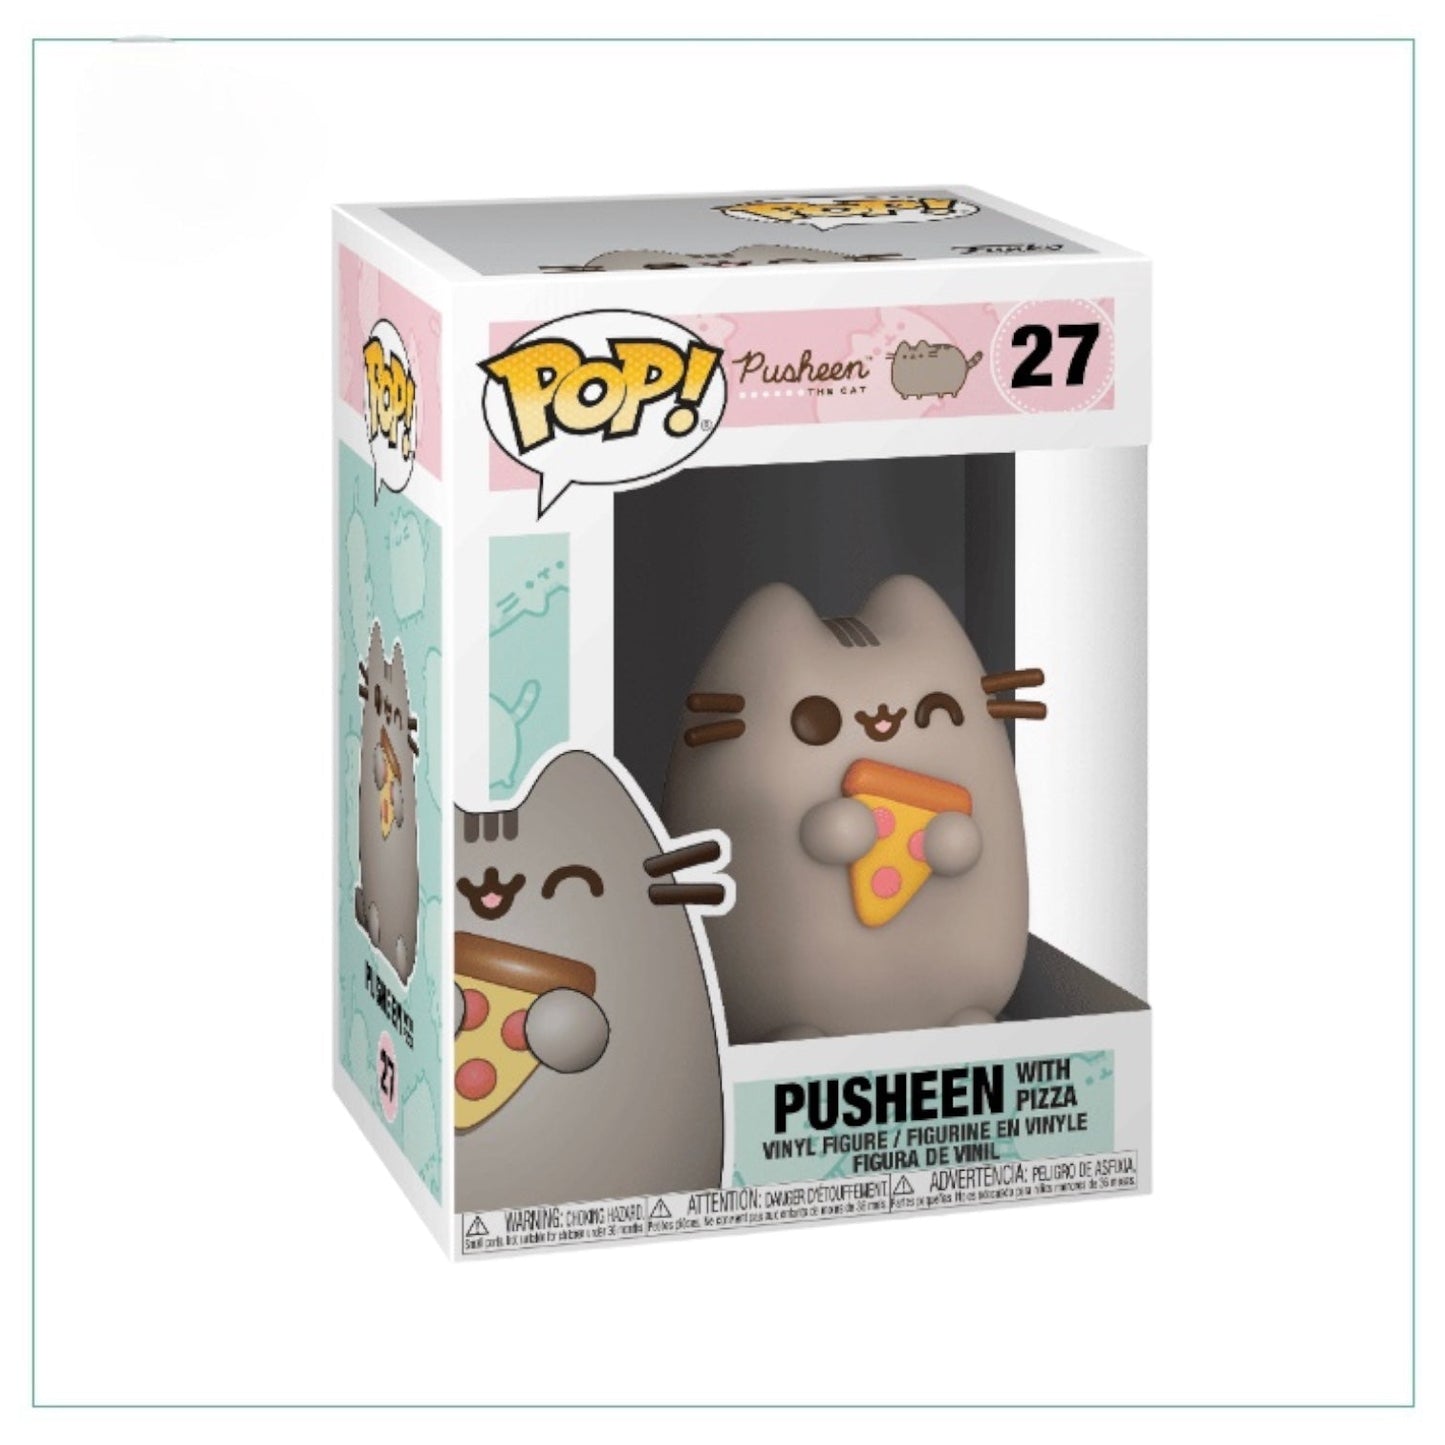 Pusheen with Pizza #27 Funko Pop! - Pusheen the Cat - Angry Cat